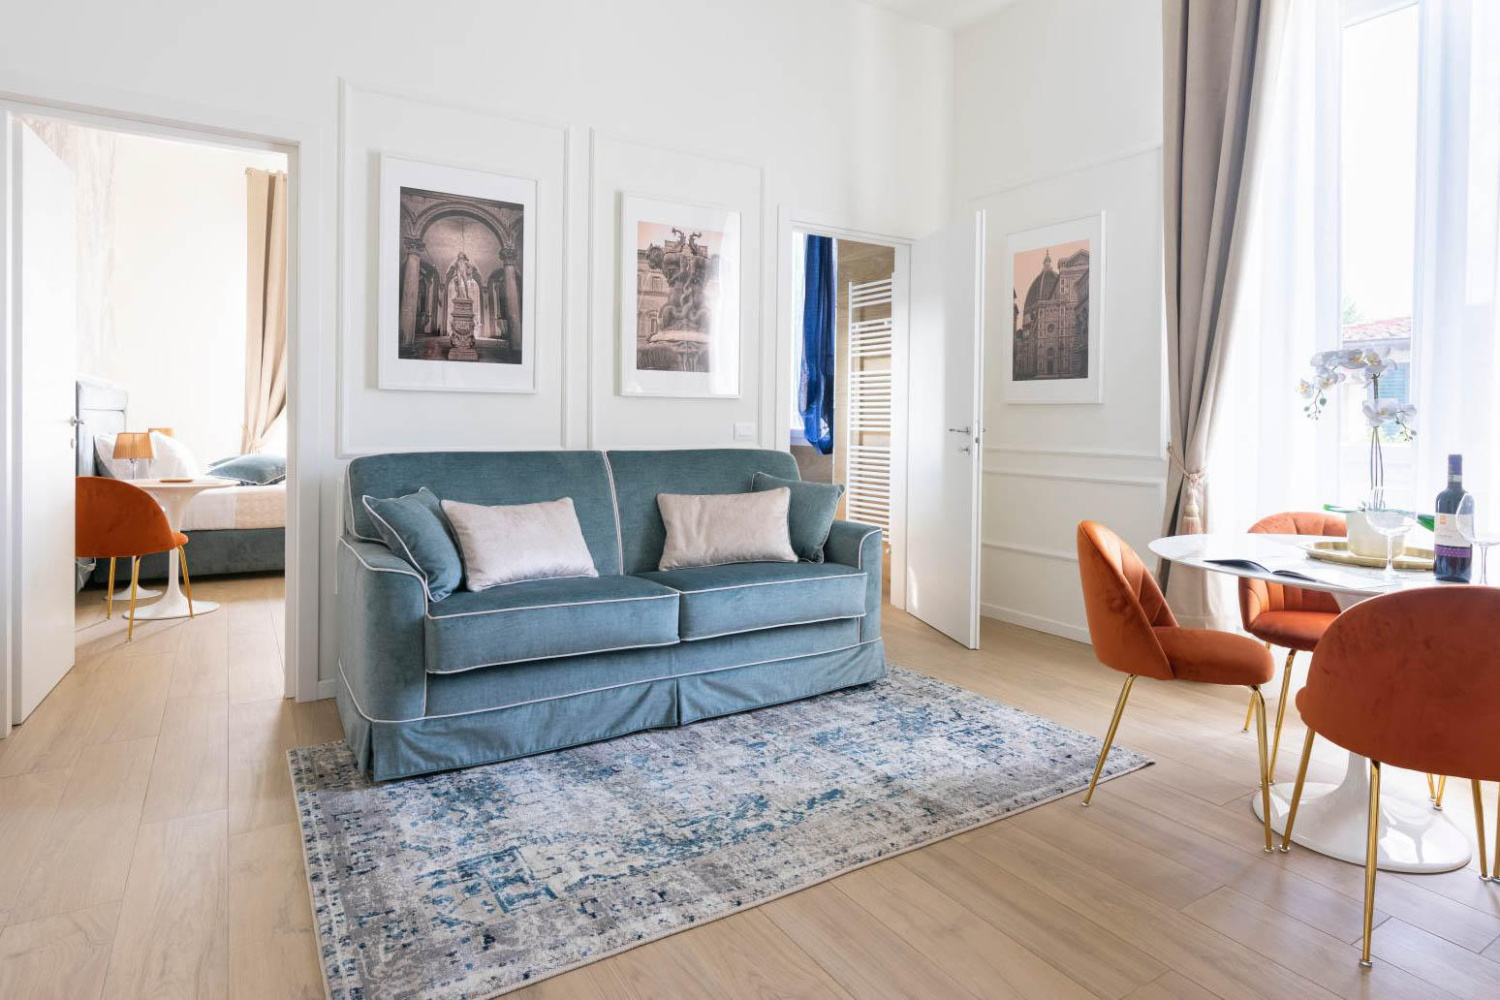 FLORENCE FEEL APARTMENTS IN FLORENZ - IBFOR - Your design shop